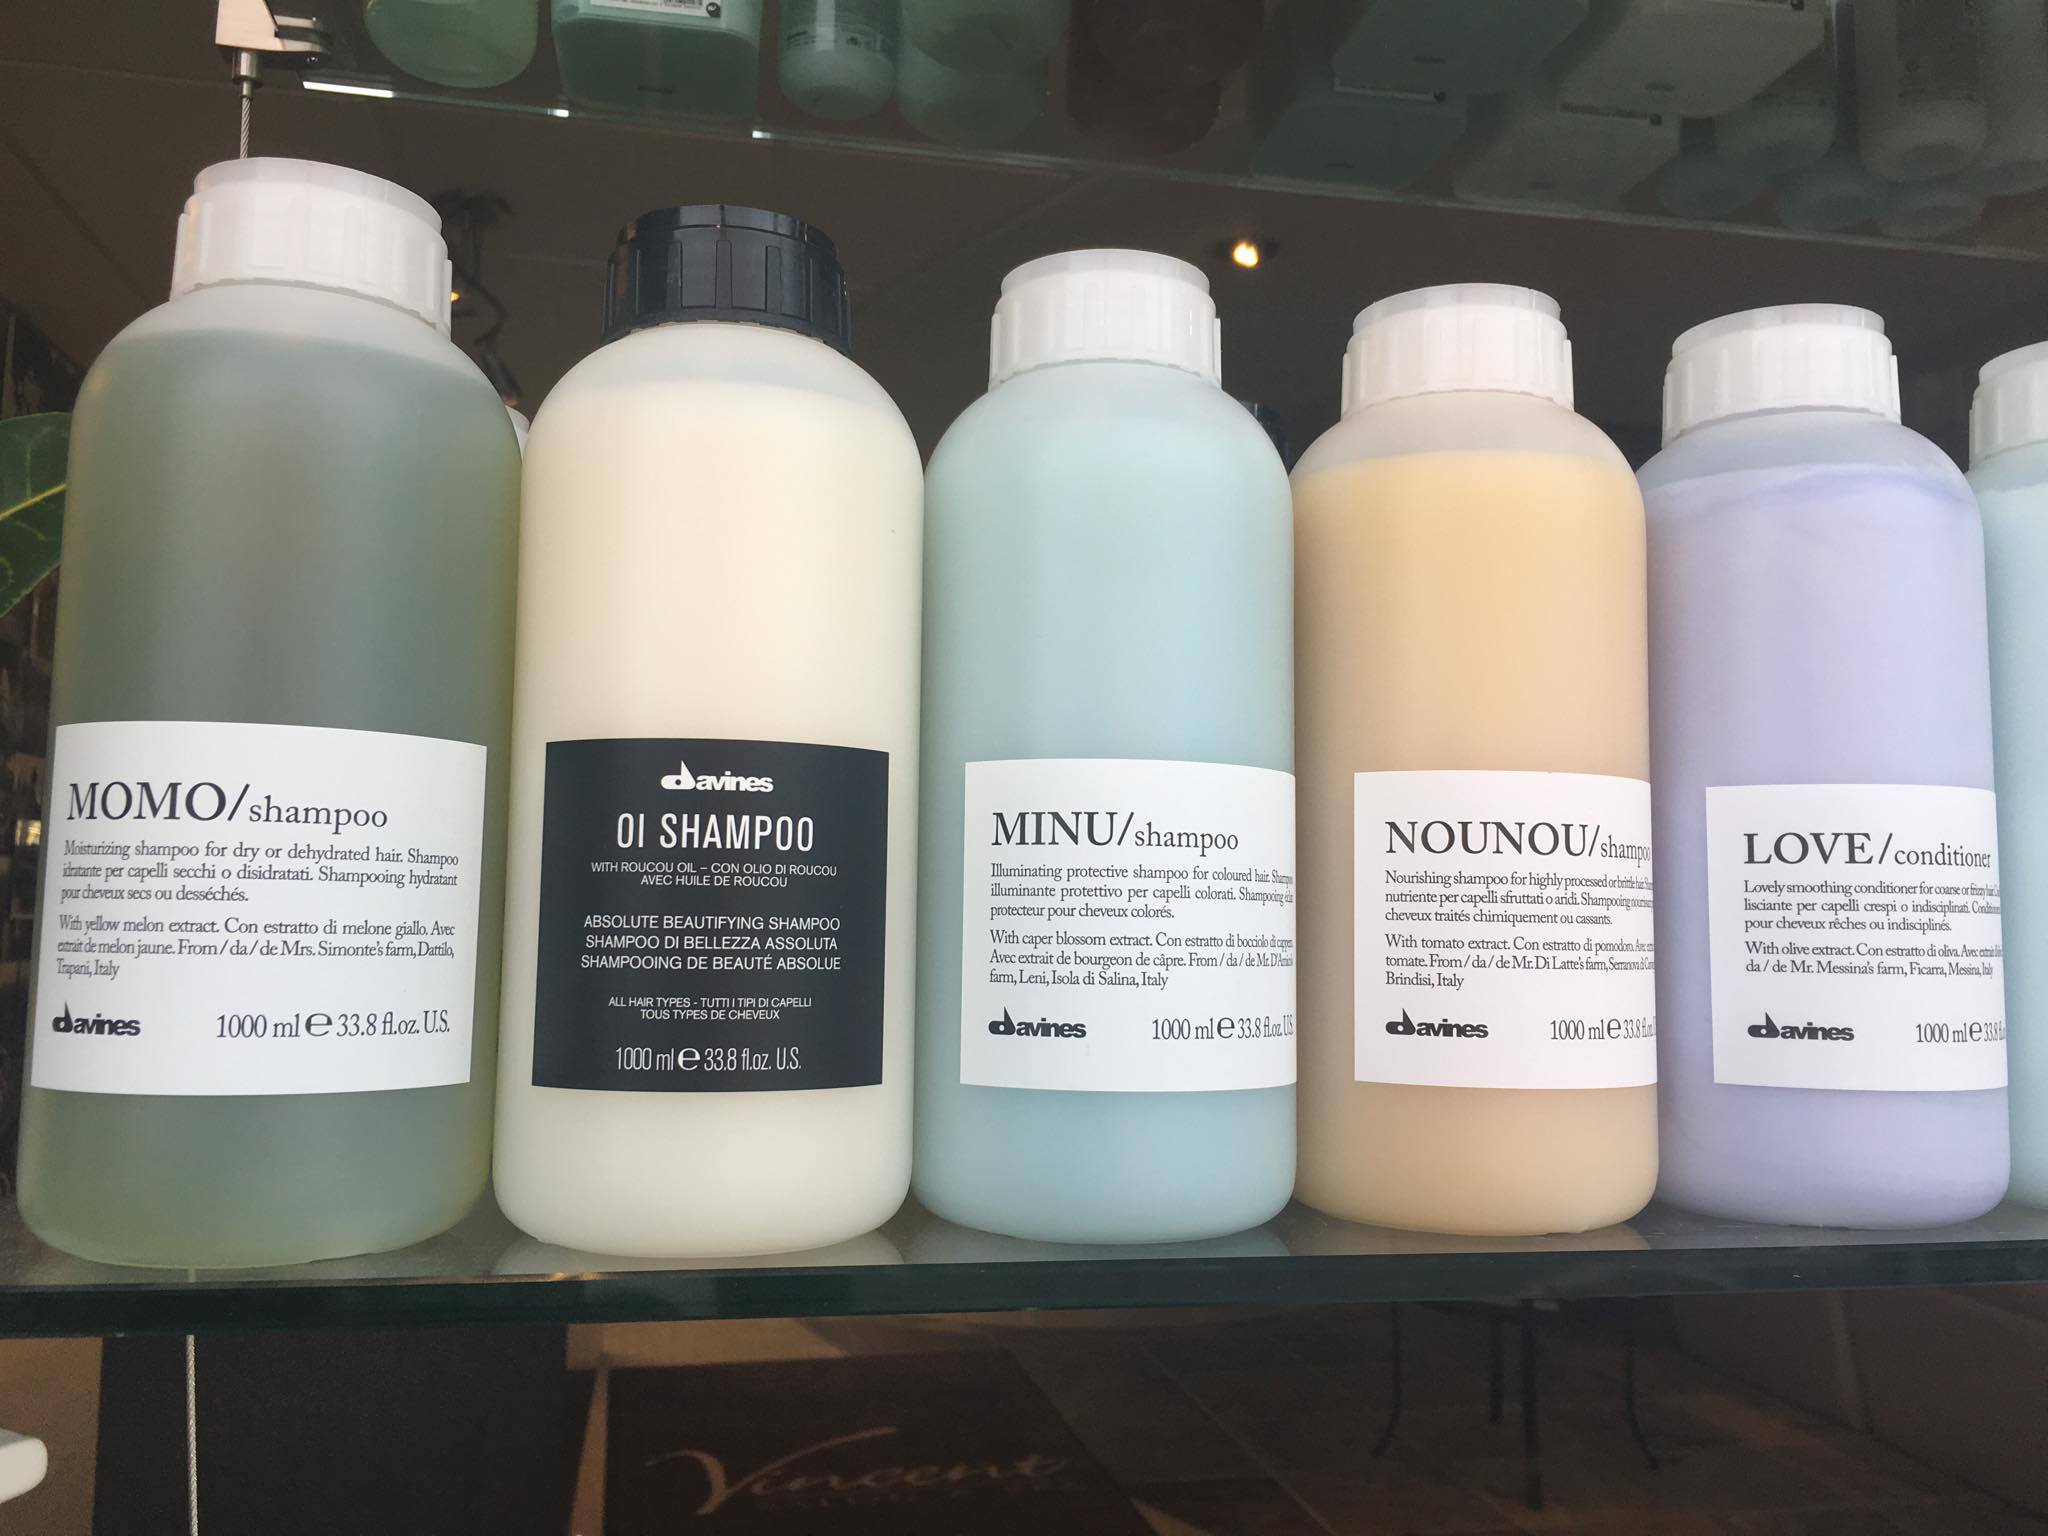 Davines litres are back. 